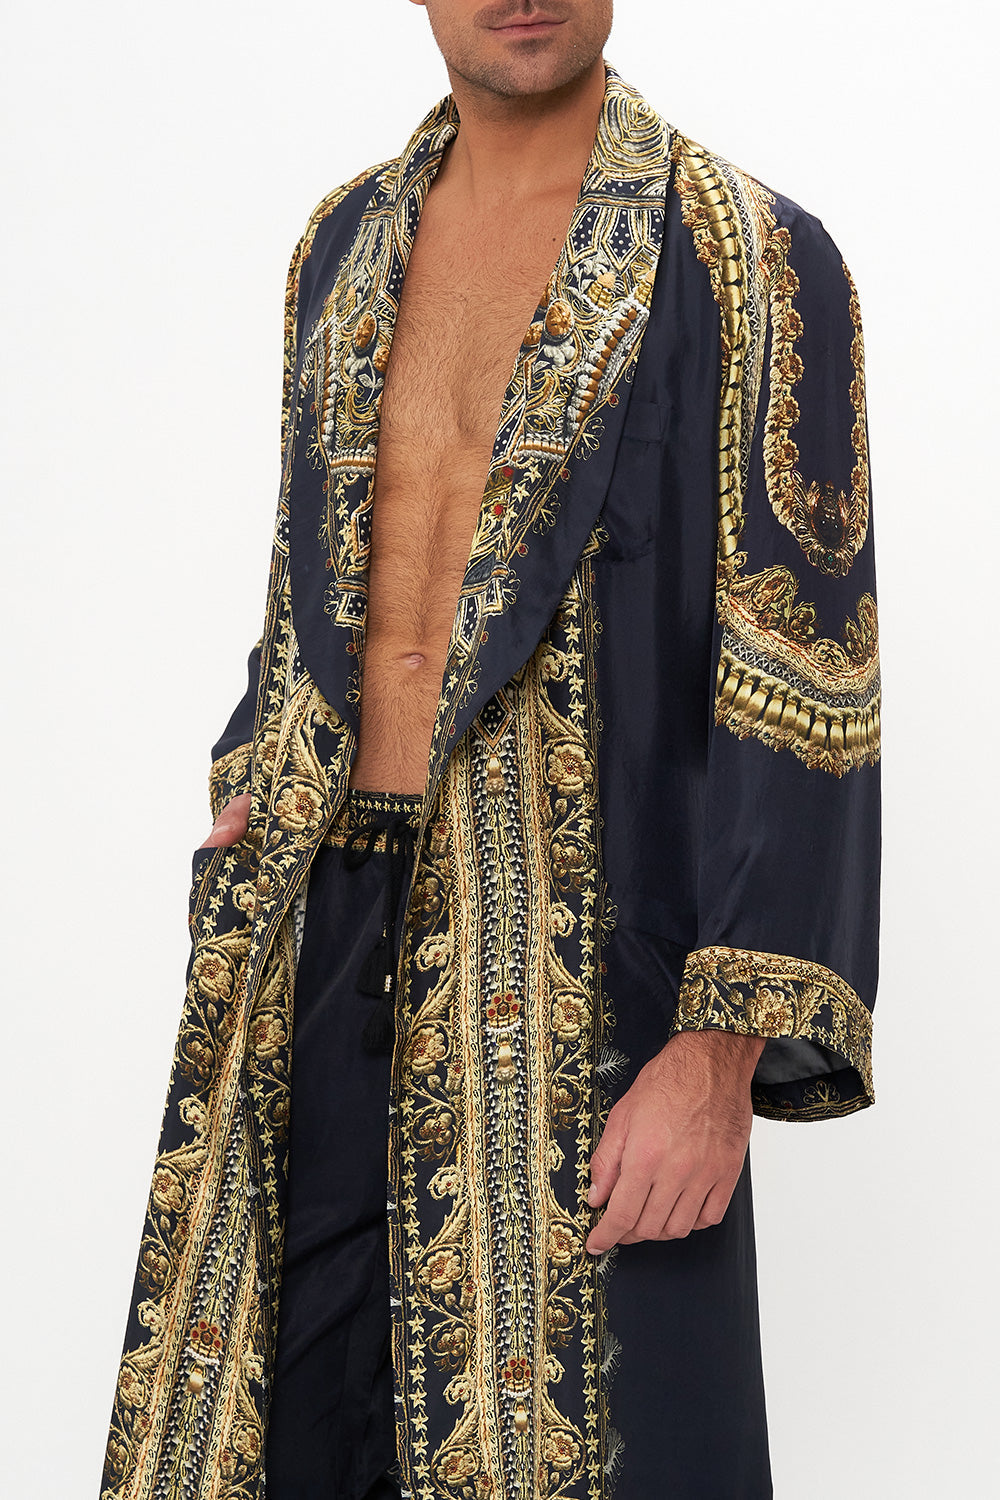 LONG LINE ROBE ITS ALL OVER TORERO